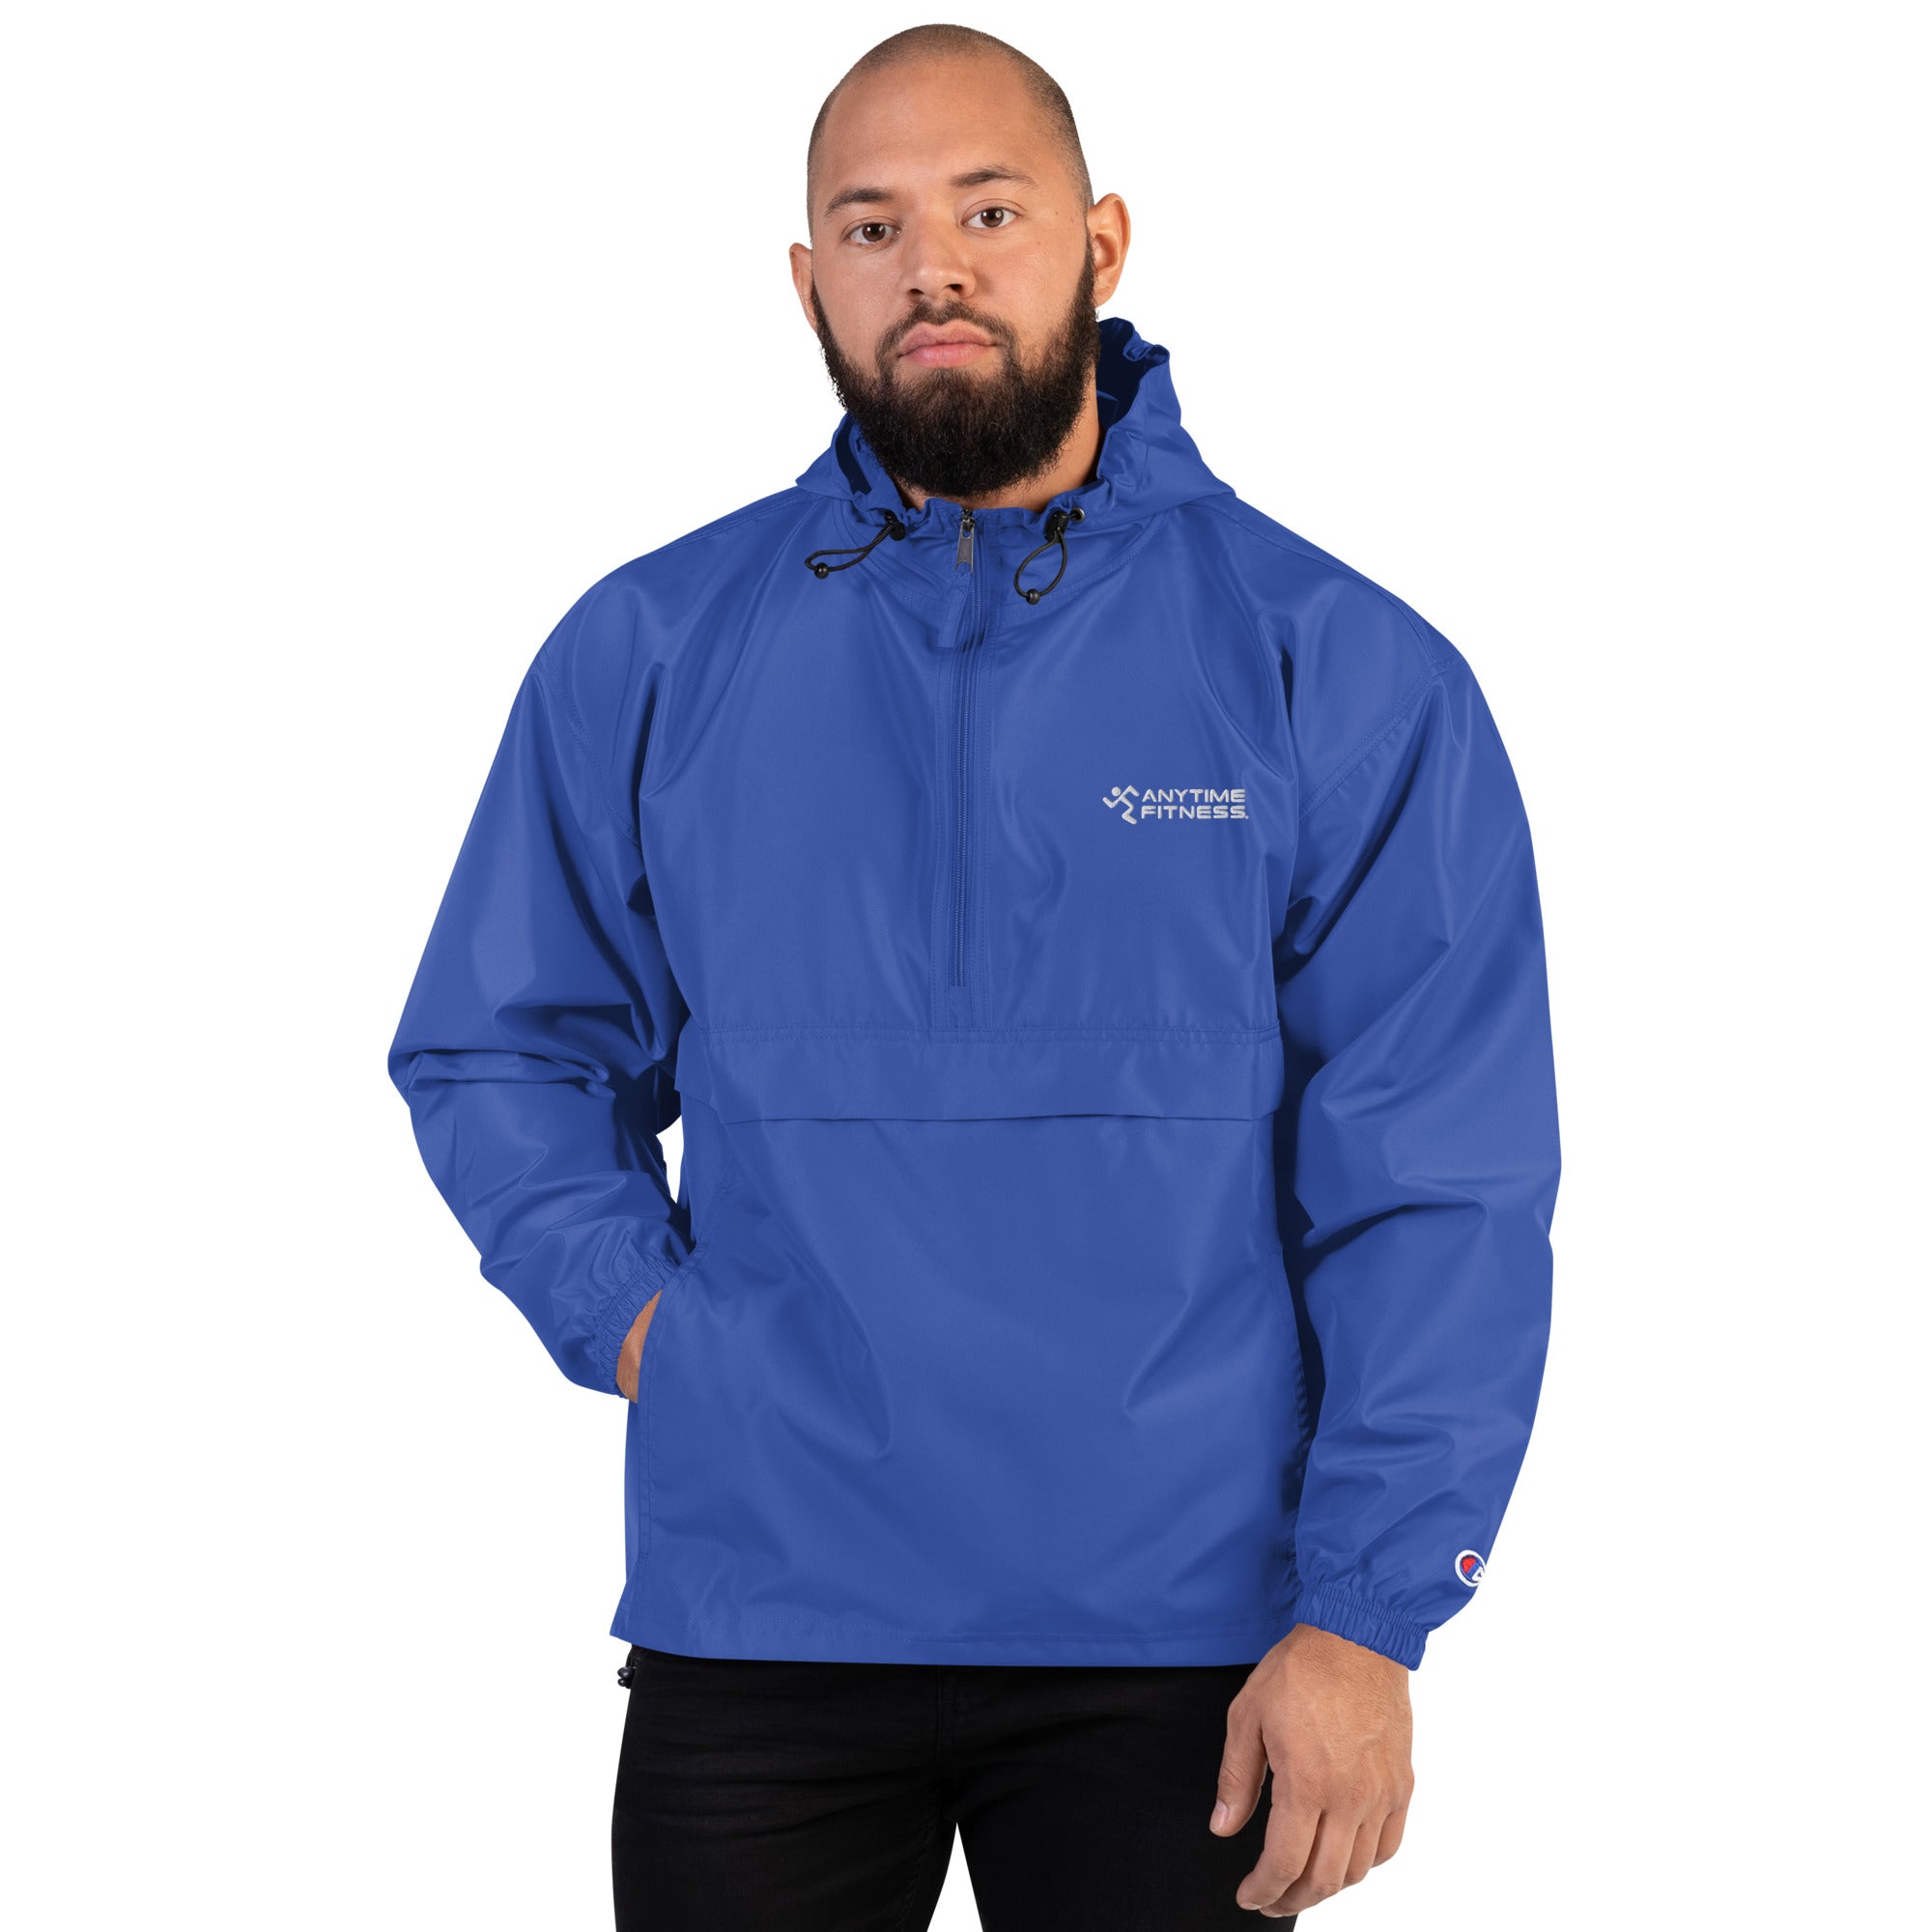 Embroidered Logo Running Man & Anytime Fitness Champion Packable Jacket